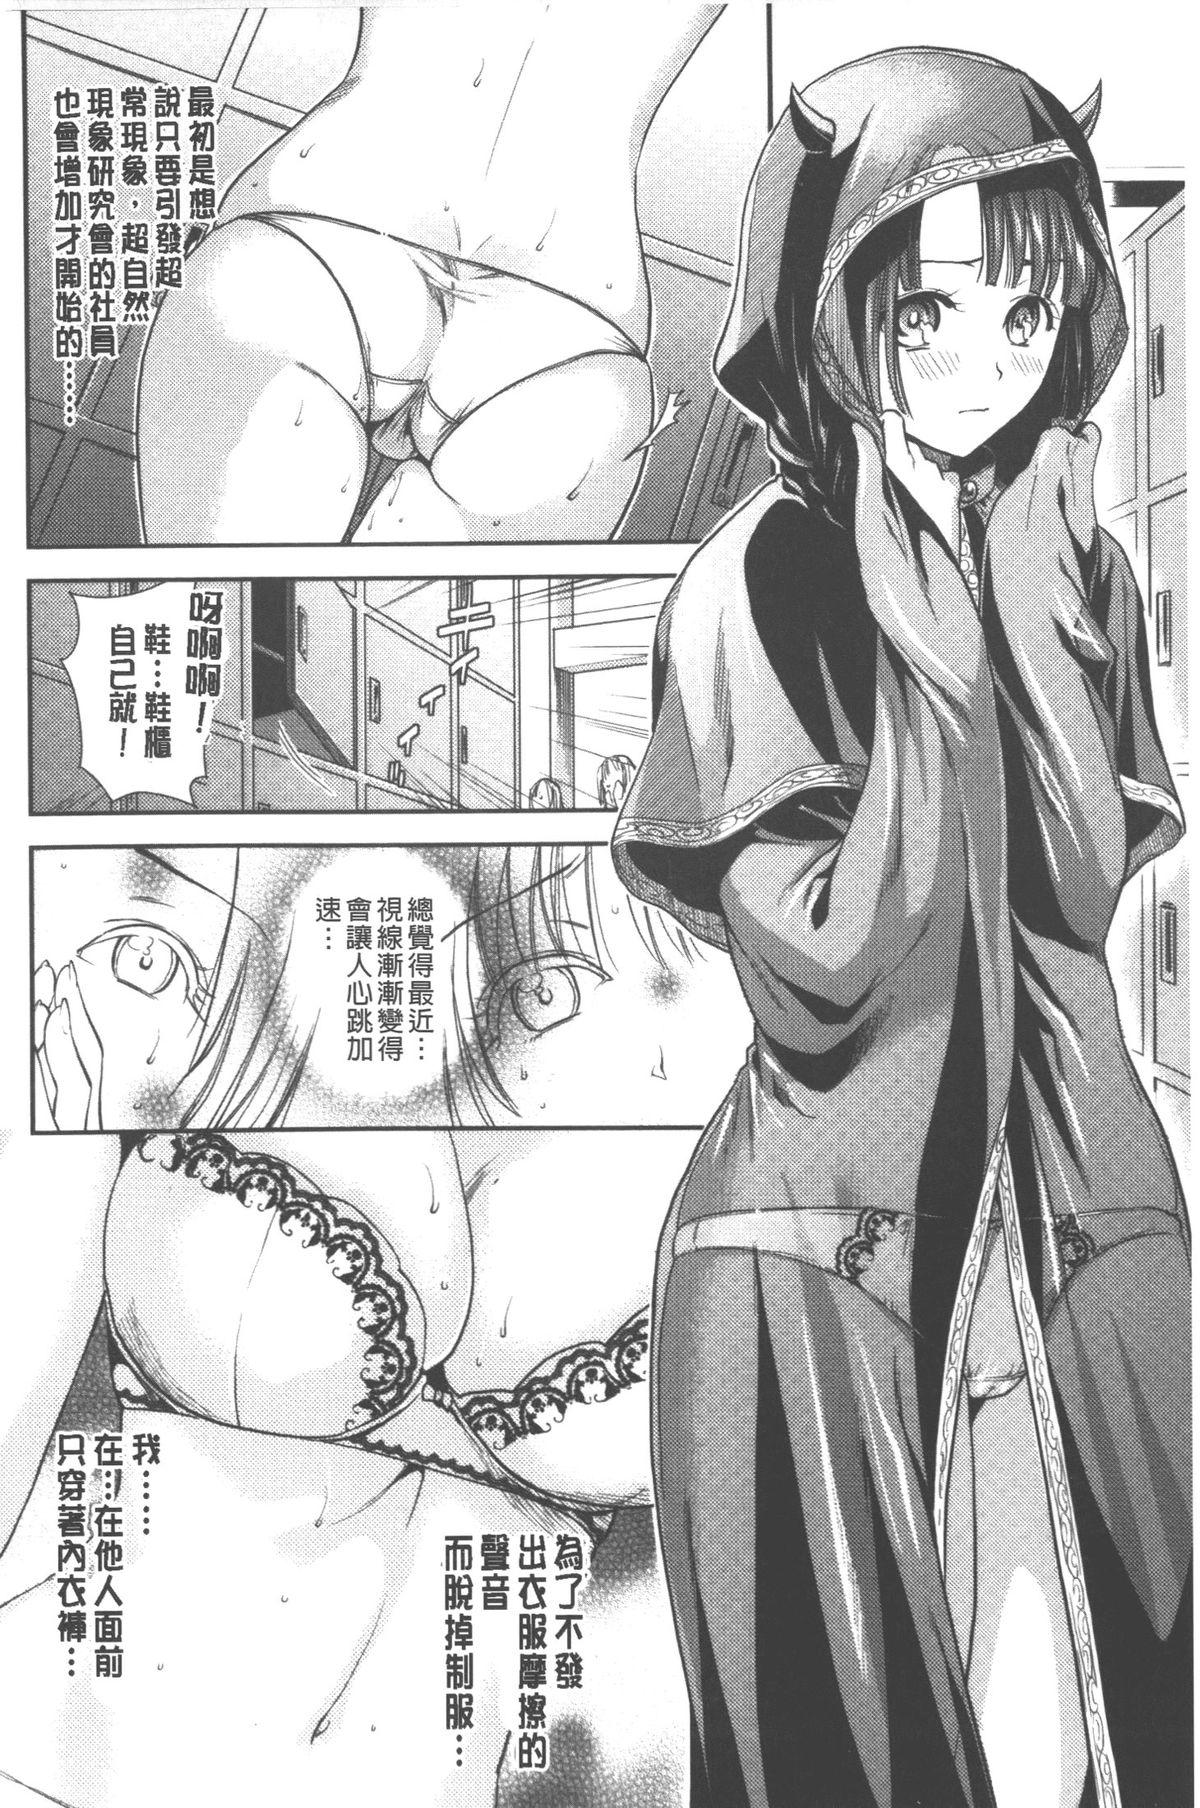 Assfuck Hatsujou no Genri - The Principle of Sexual Excitement Ass Fucking - Page 7